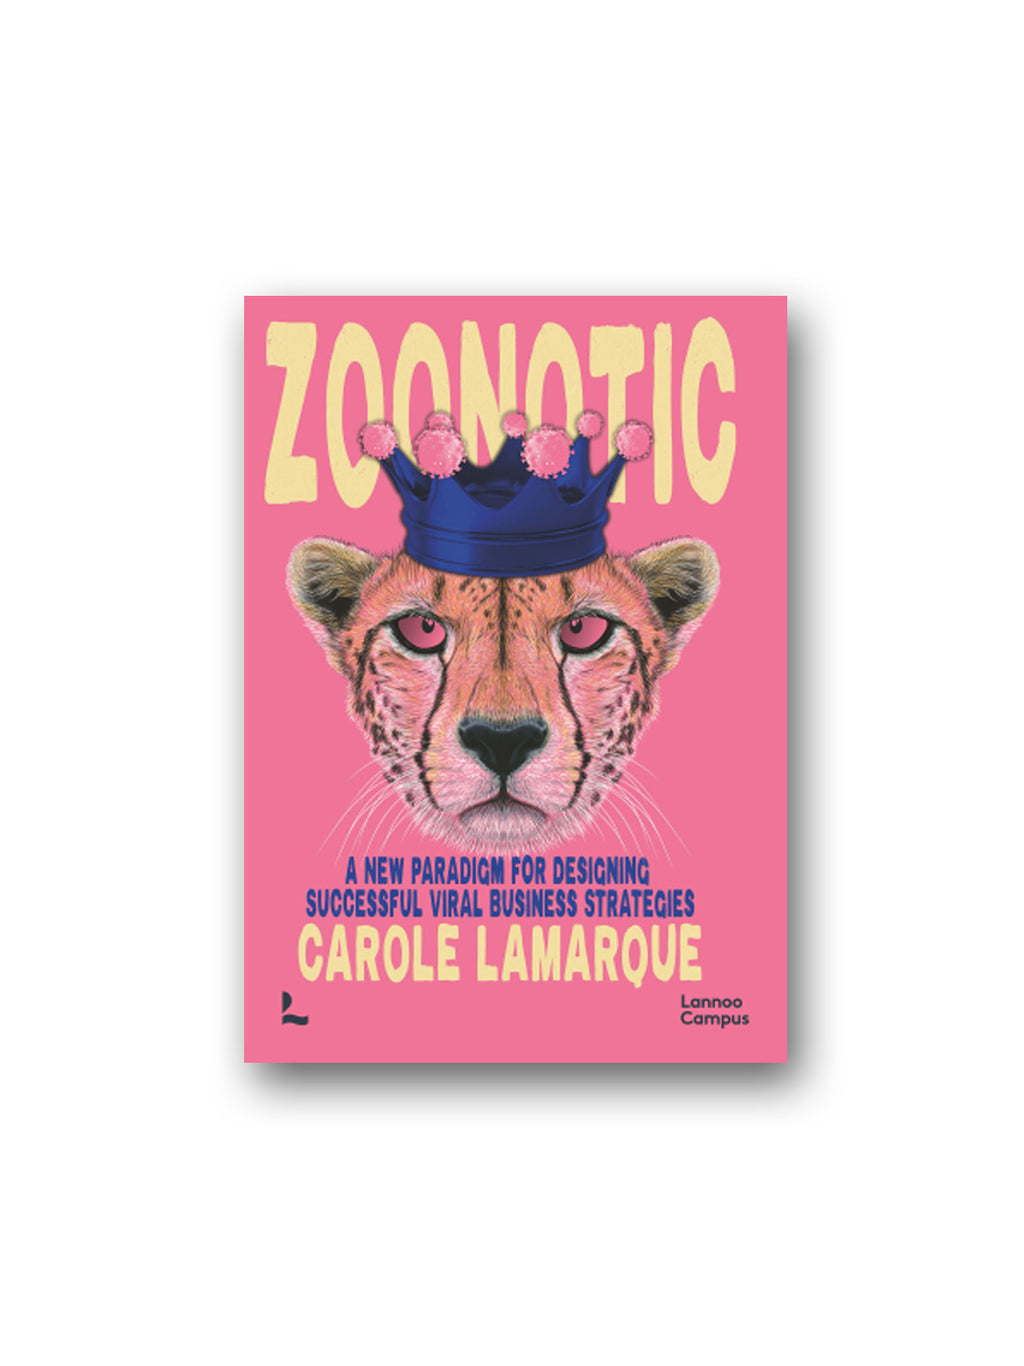 Zoonotic : A New Paradigm for Designing Successful Viral Business Strategies